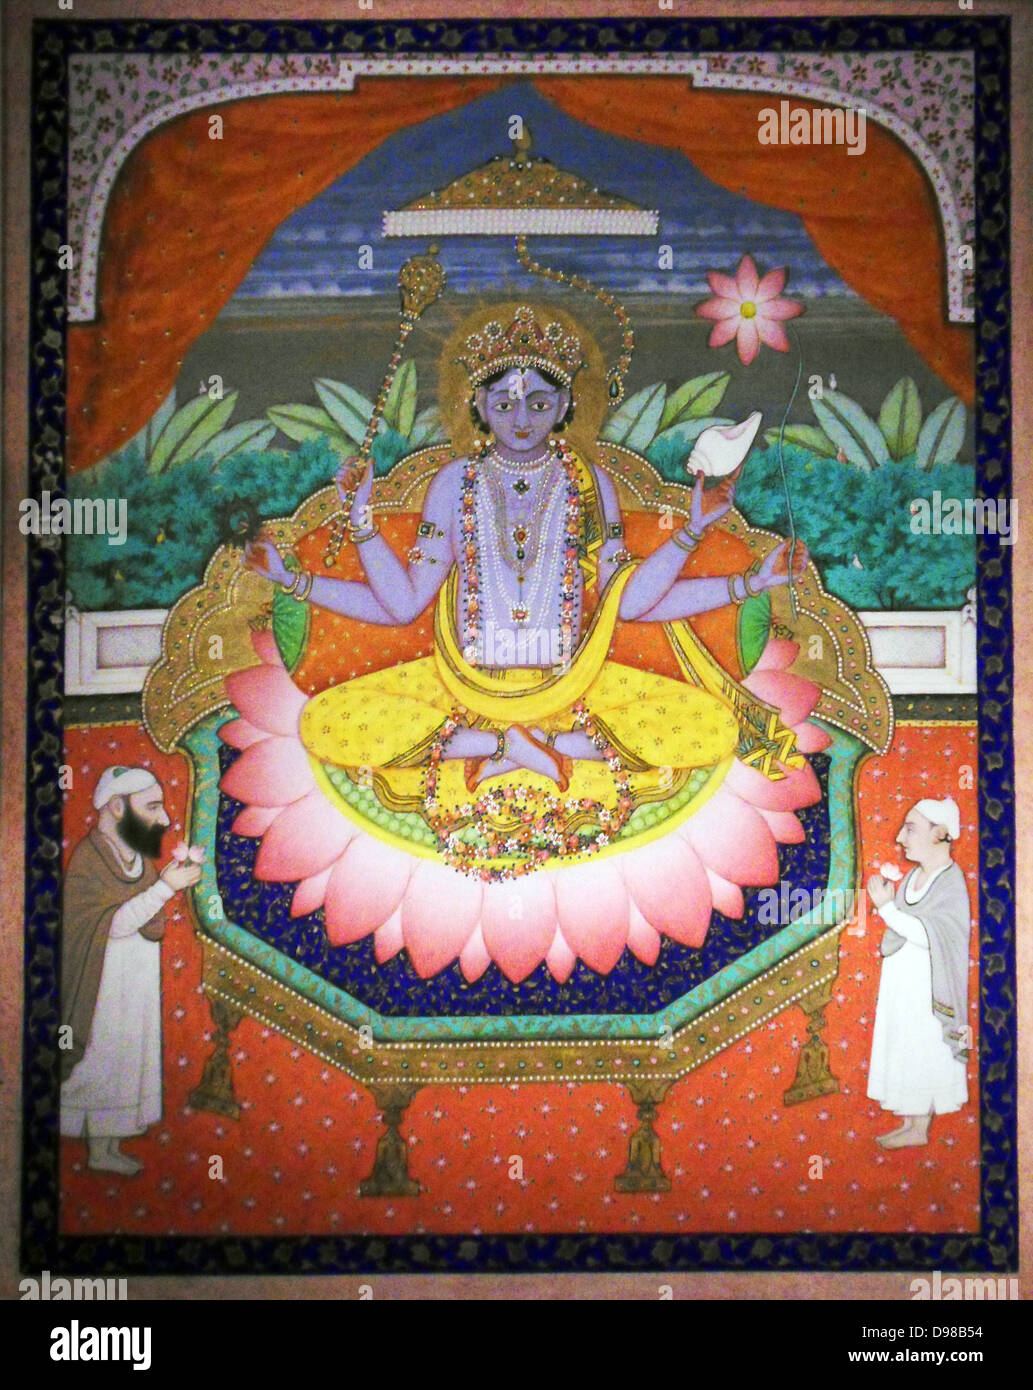 Vishnu on a lotus petal throne. Early 1900's, India. Gold leaf and gouache on paper. Vishnu is the Supreme God in the Vaishnavite tradition of Hinduism Stock Photo